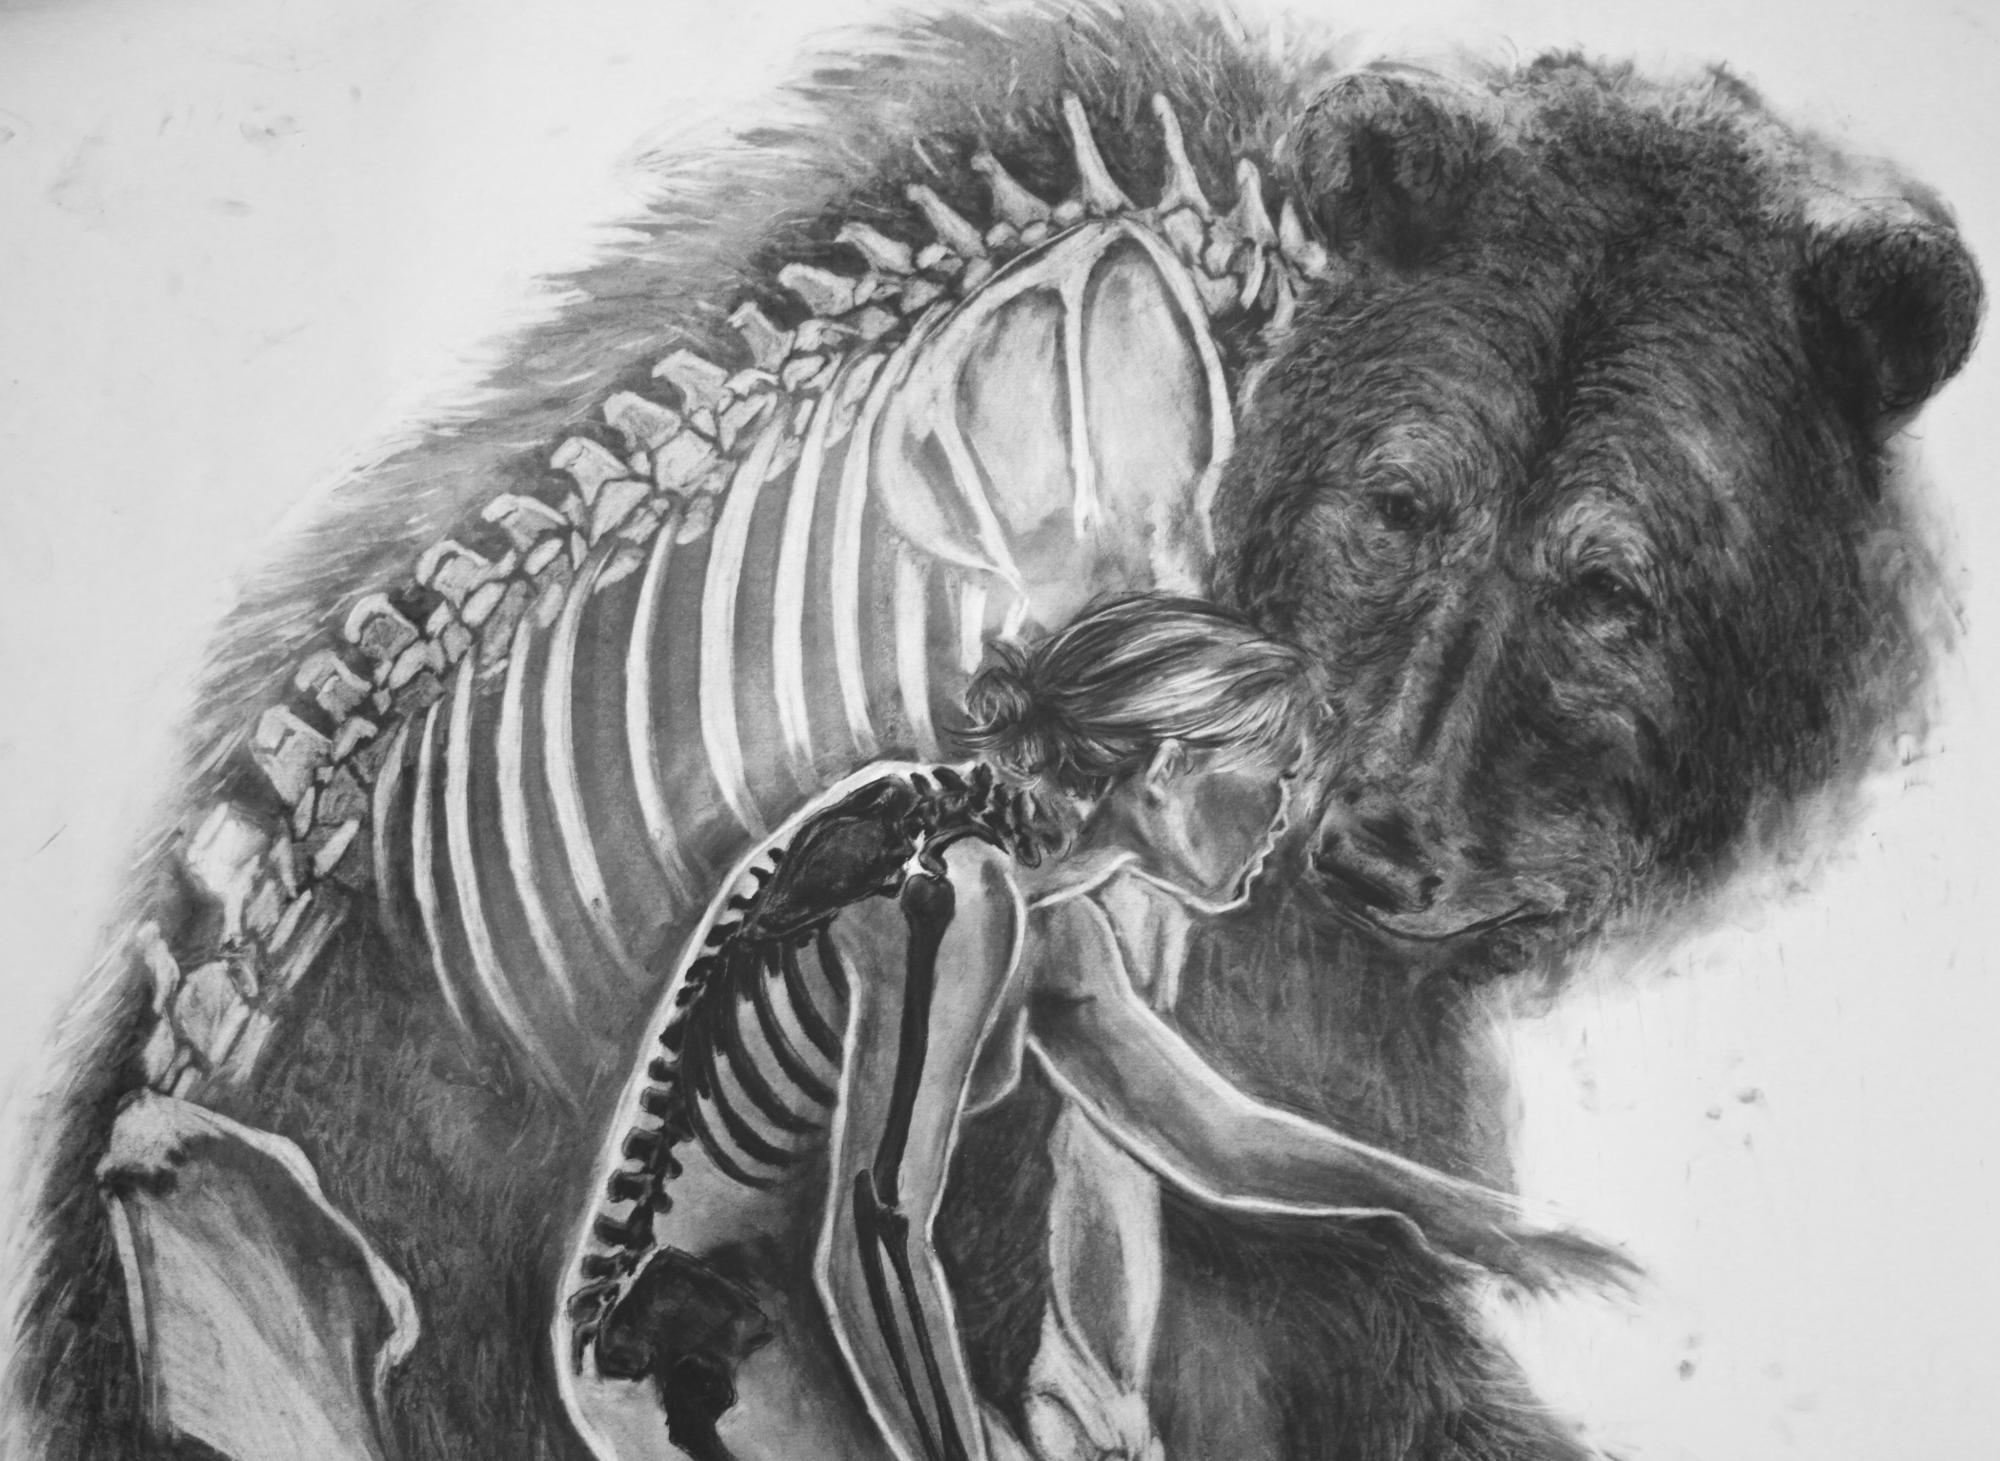 Charcoal drawing. A hunched human figure stands in front of a bear, both facing the side. The bear sits and turns its head towards her. Both have their arms reached out, the human looking at her hand and the bear's paw together. The skeletons of both are visible.